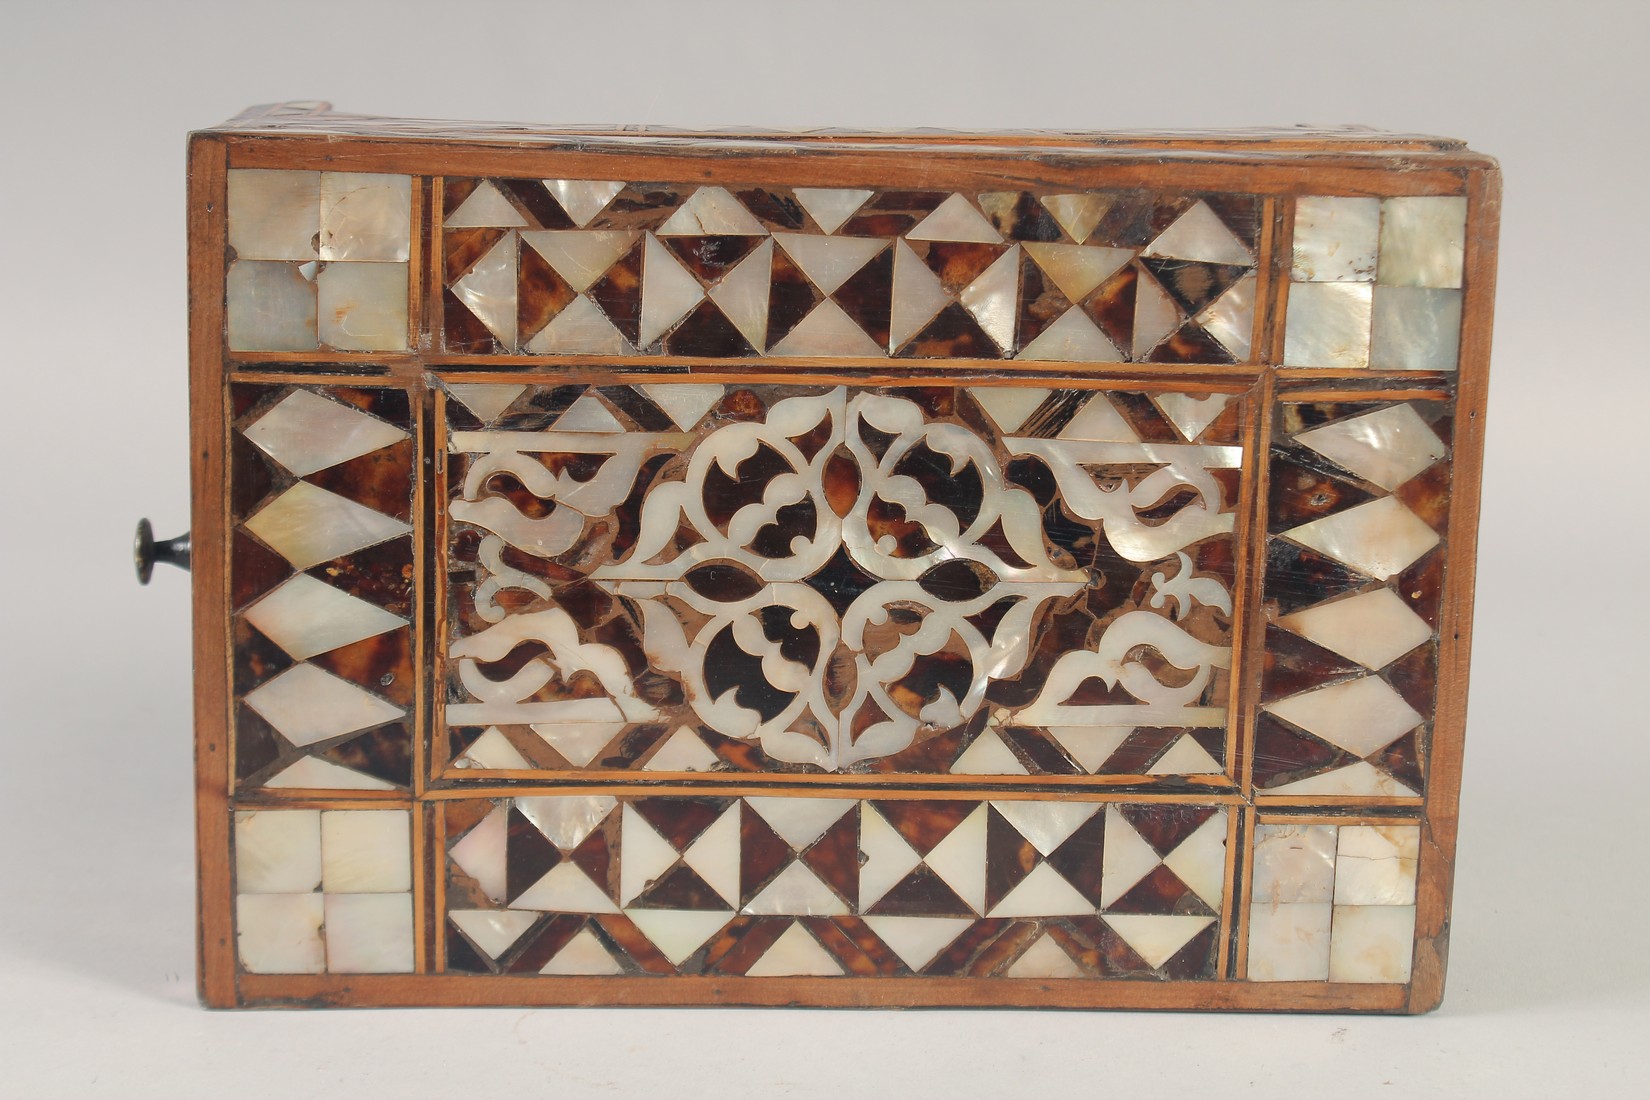 A 18TH CENTURY OTTOMAN MOTHER OF PEARL INLAID WOODEN MIRROR BOX, further inlaid with - Image 3 of 4